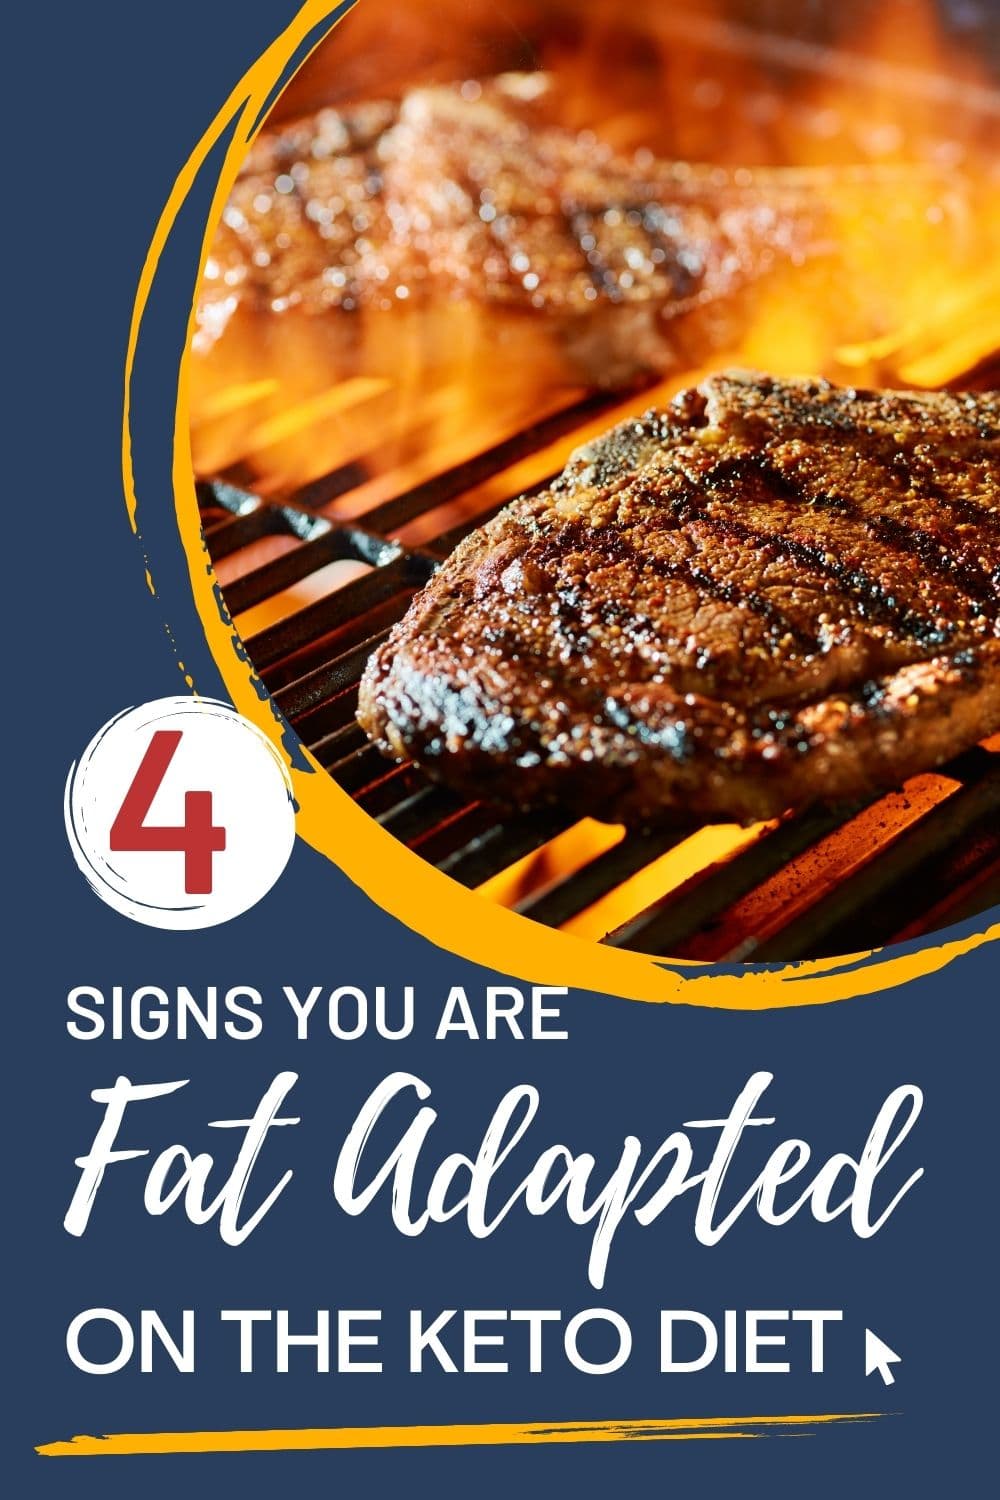 hero image for keto diet and fat adaption